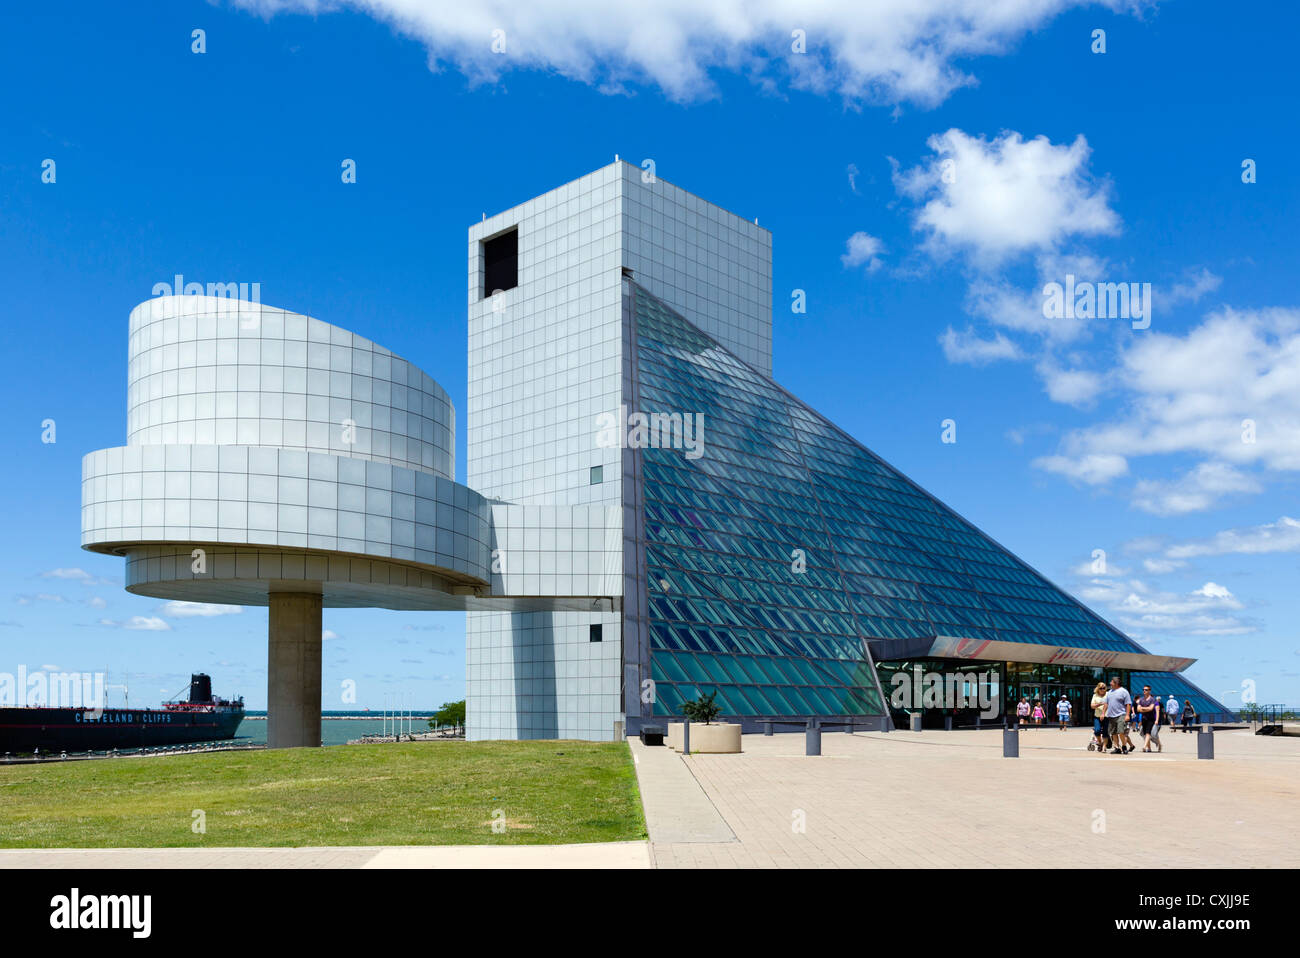 Die Rock And Roll Hall Of Fame Museum, North Coast Harbor, Cleveland, Ohio, USA Stockfoto